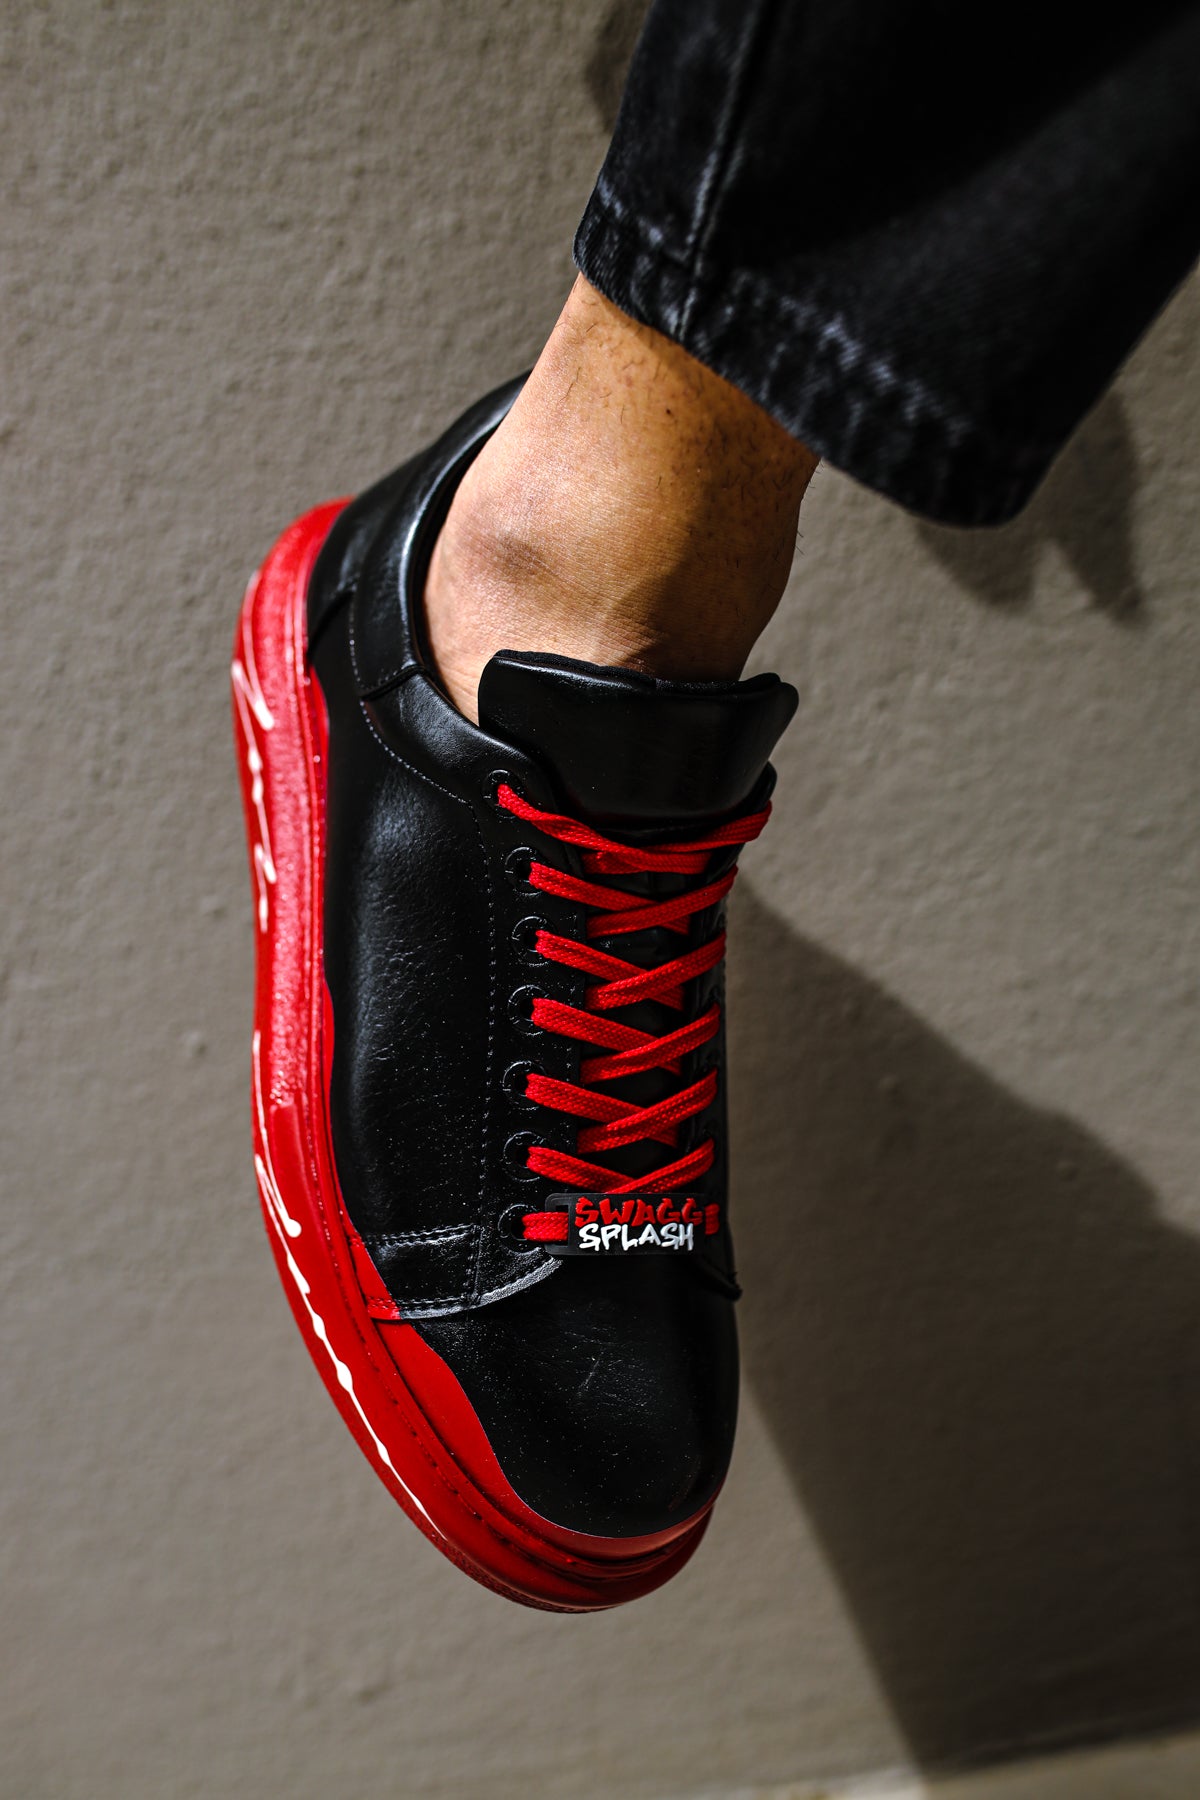 Rogue Red - Swagg Splash Sneakers